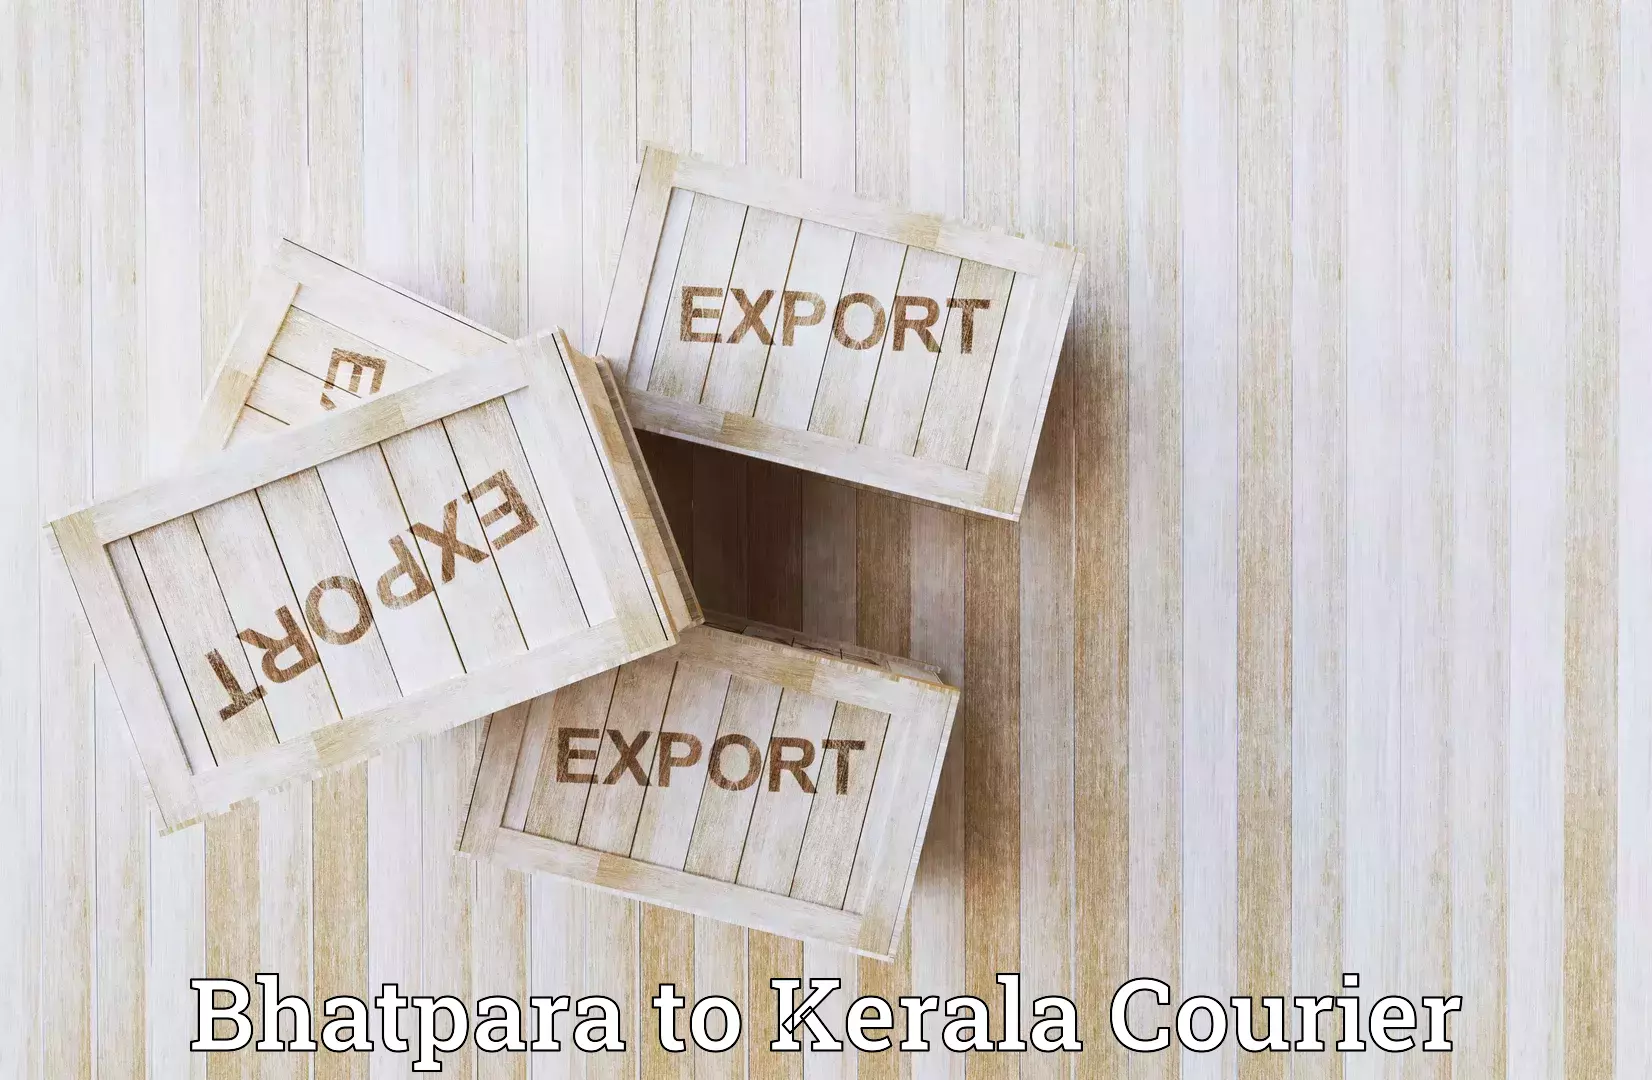 Fast shipping solutions in Bhatpara to Kottayam